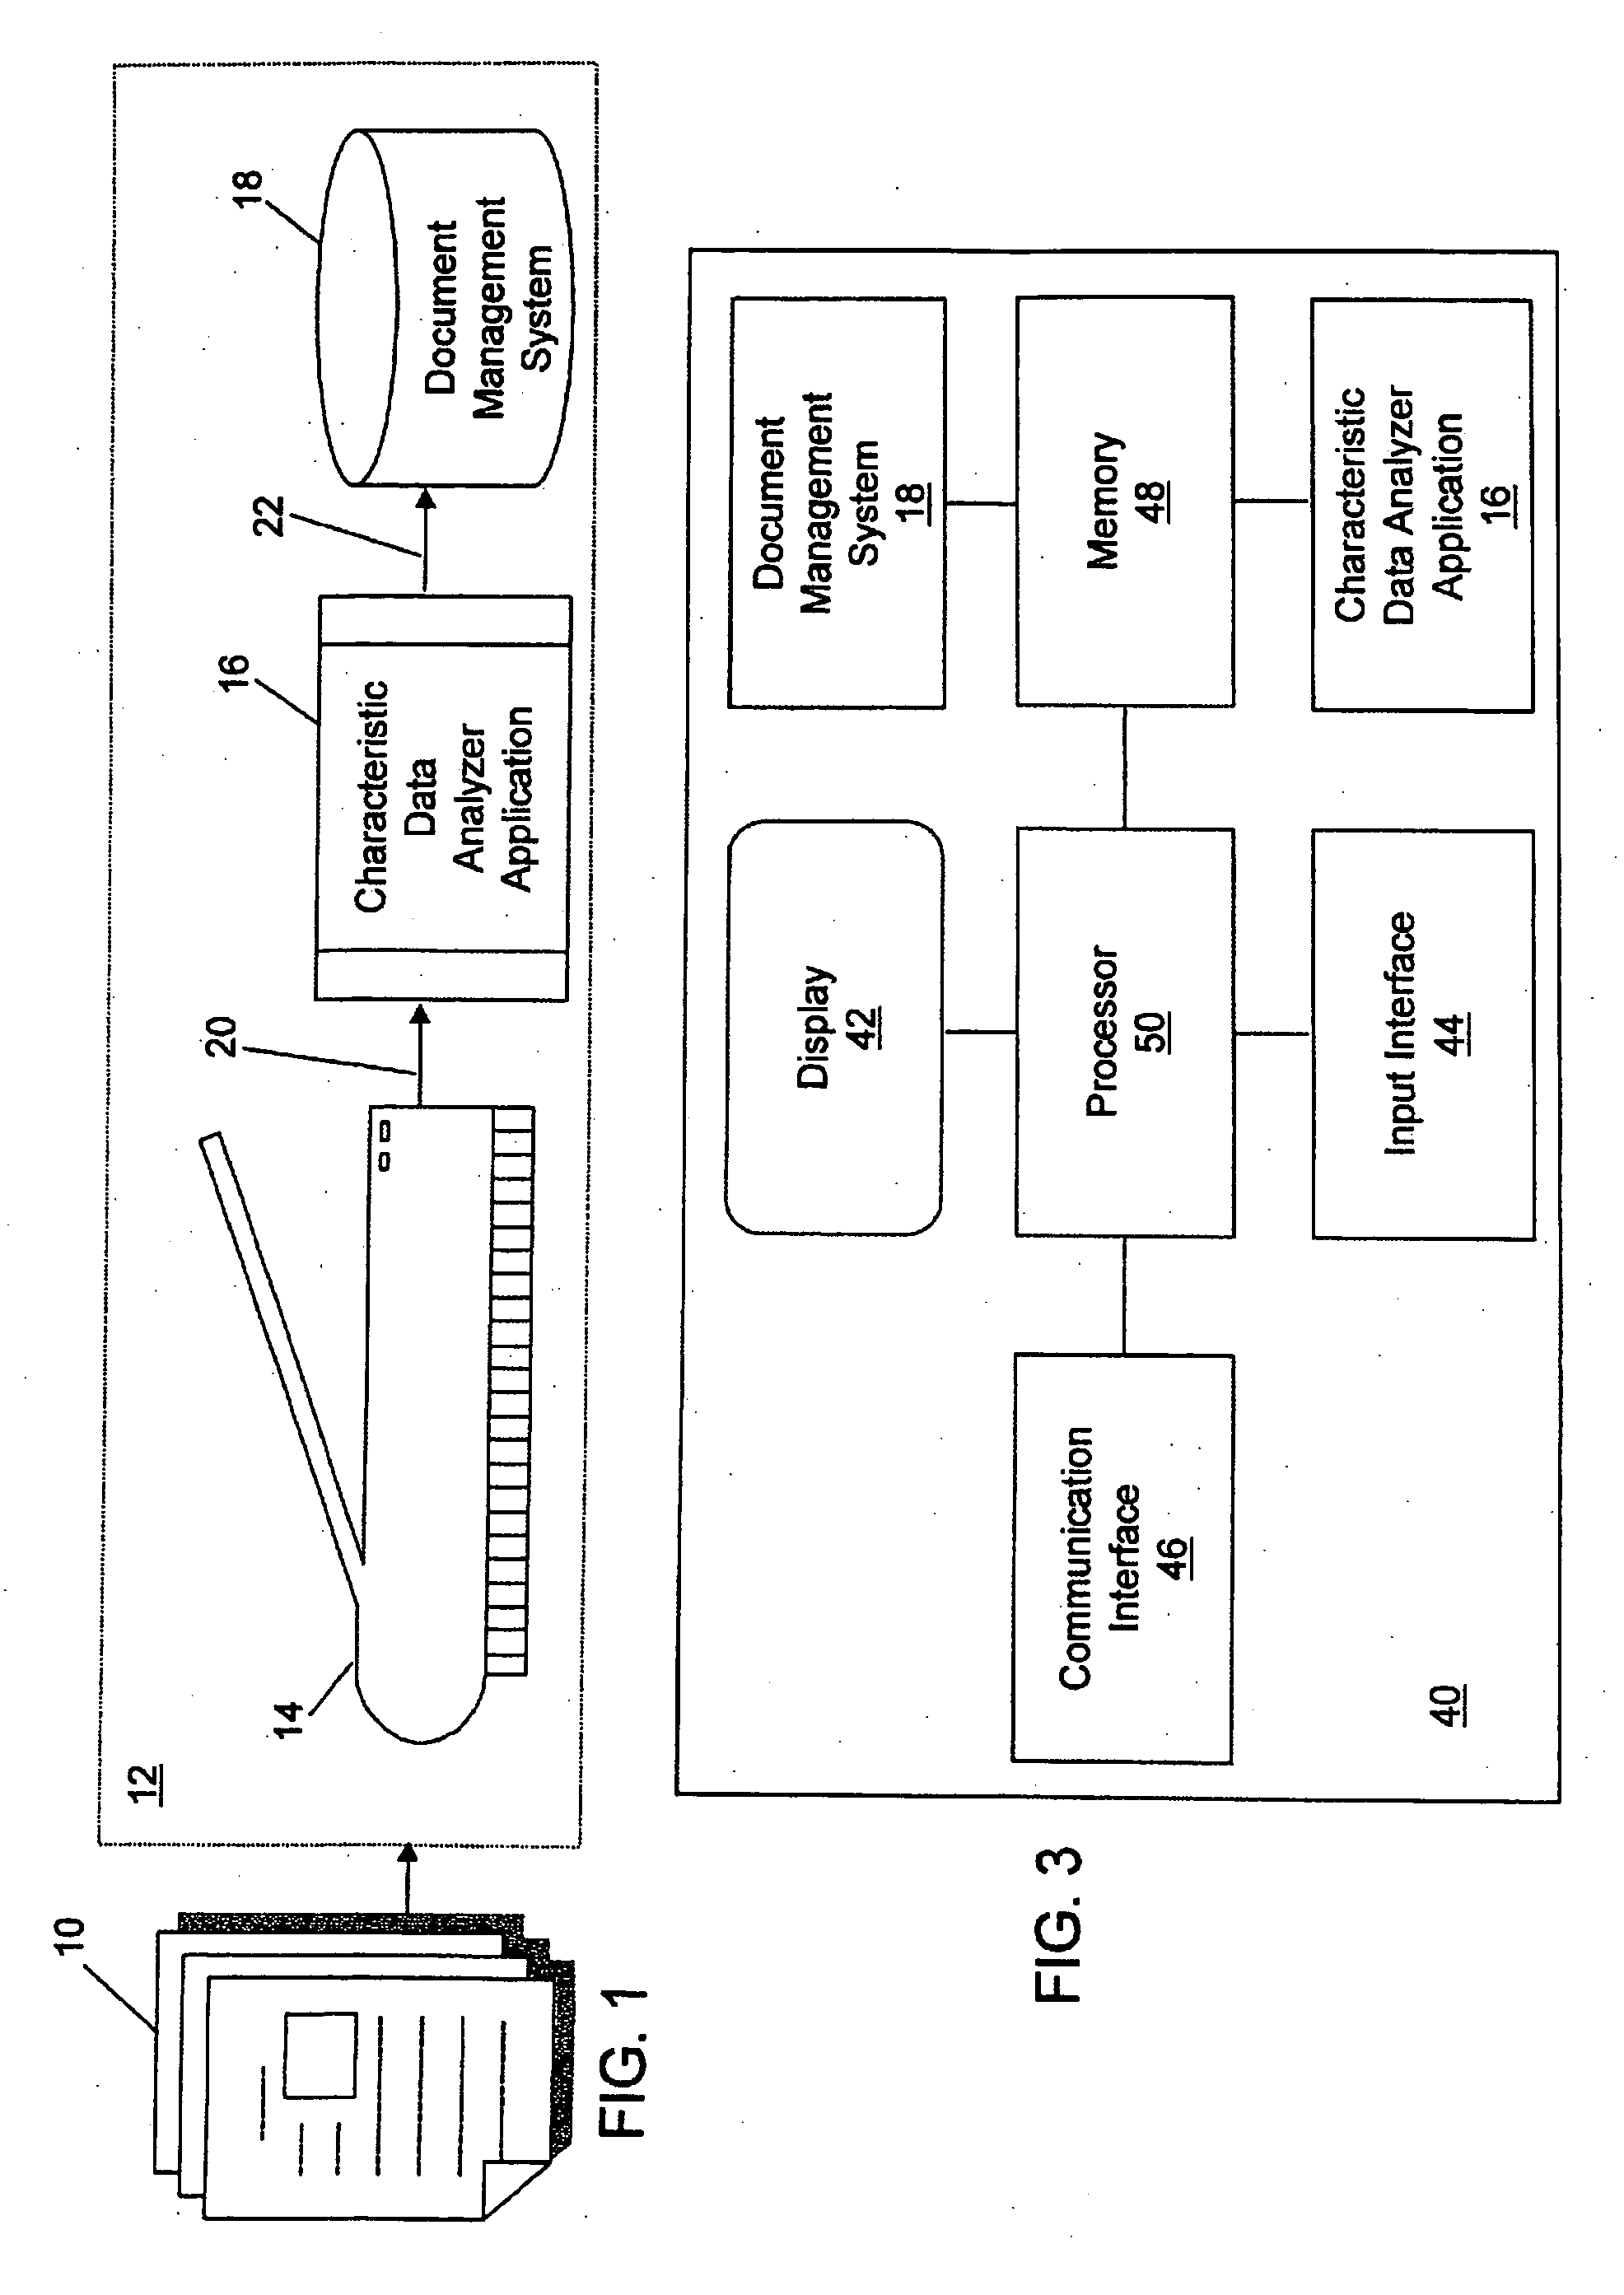 System and method for defining characteristic data of a scanned document